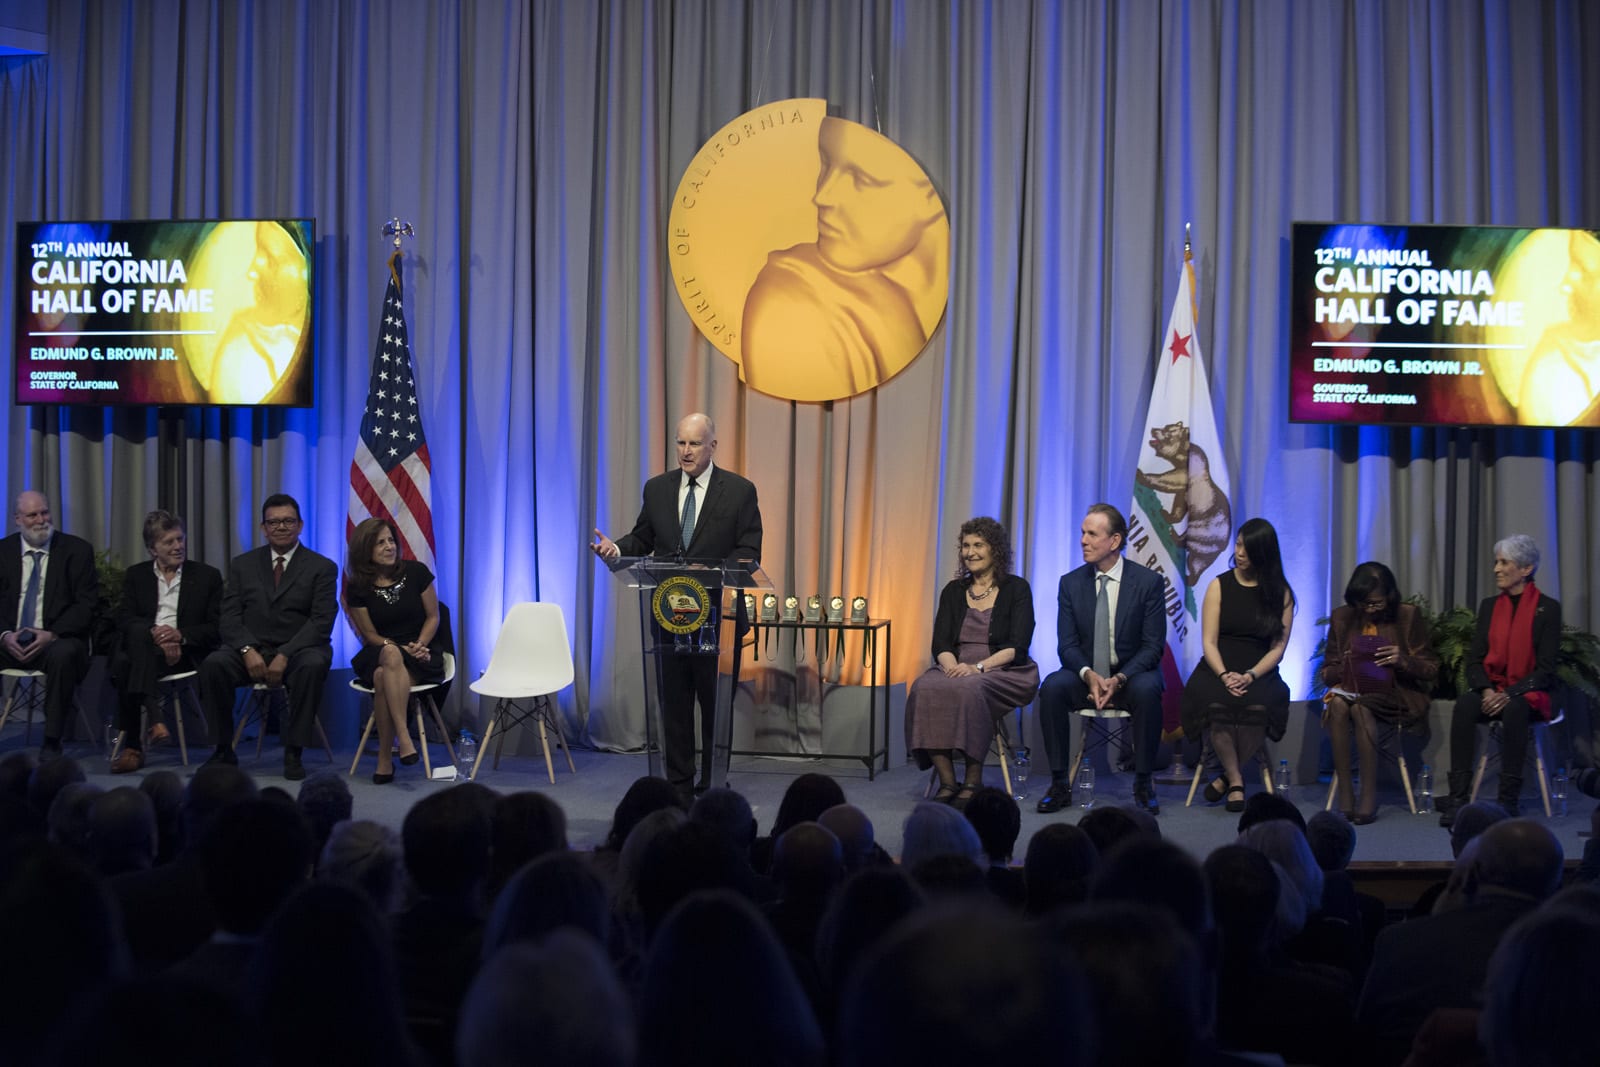 Governor Brown and First Lady Honor 2018 California Hall of Fame Inductees